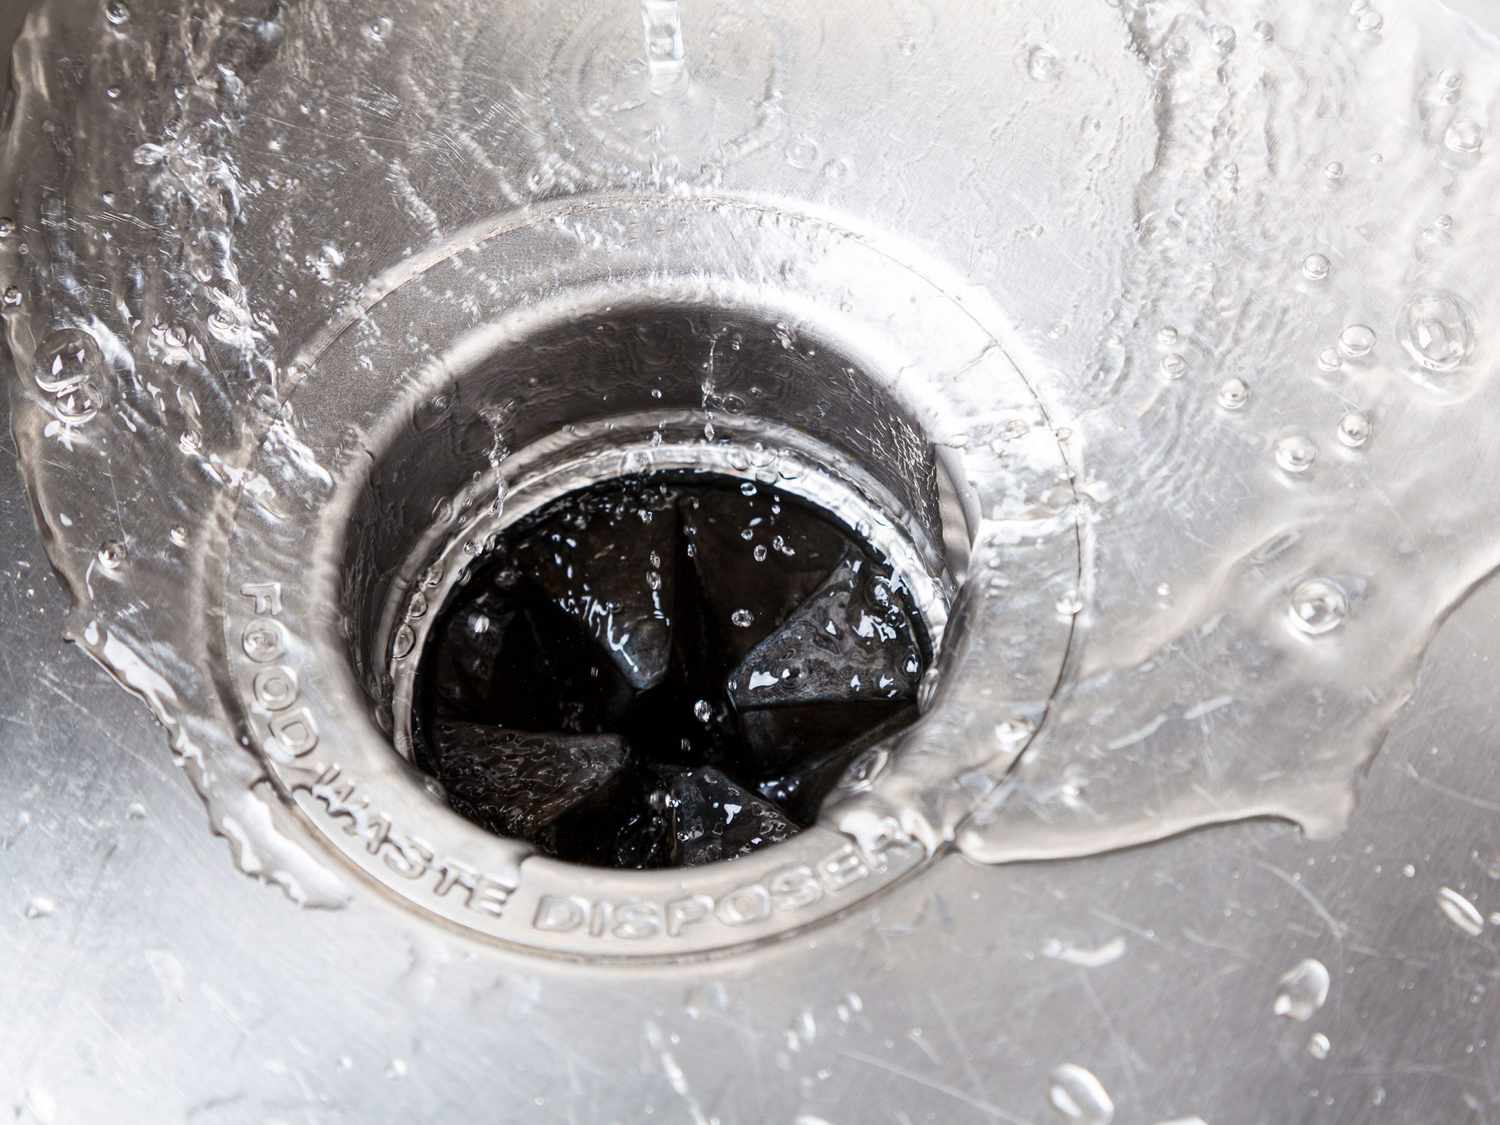 Garbage disposal in sink flushed with water